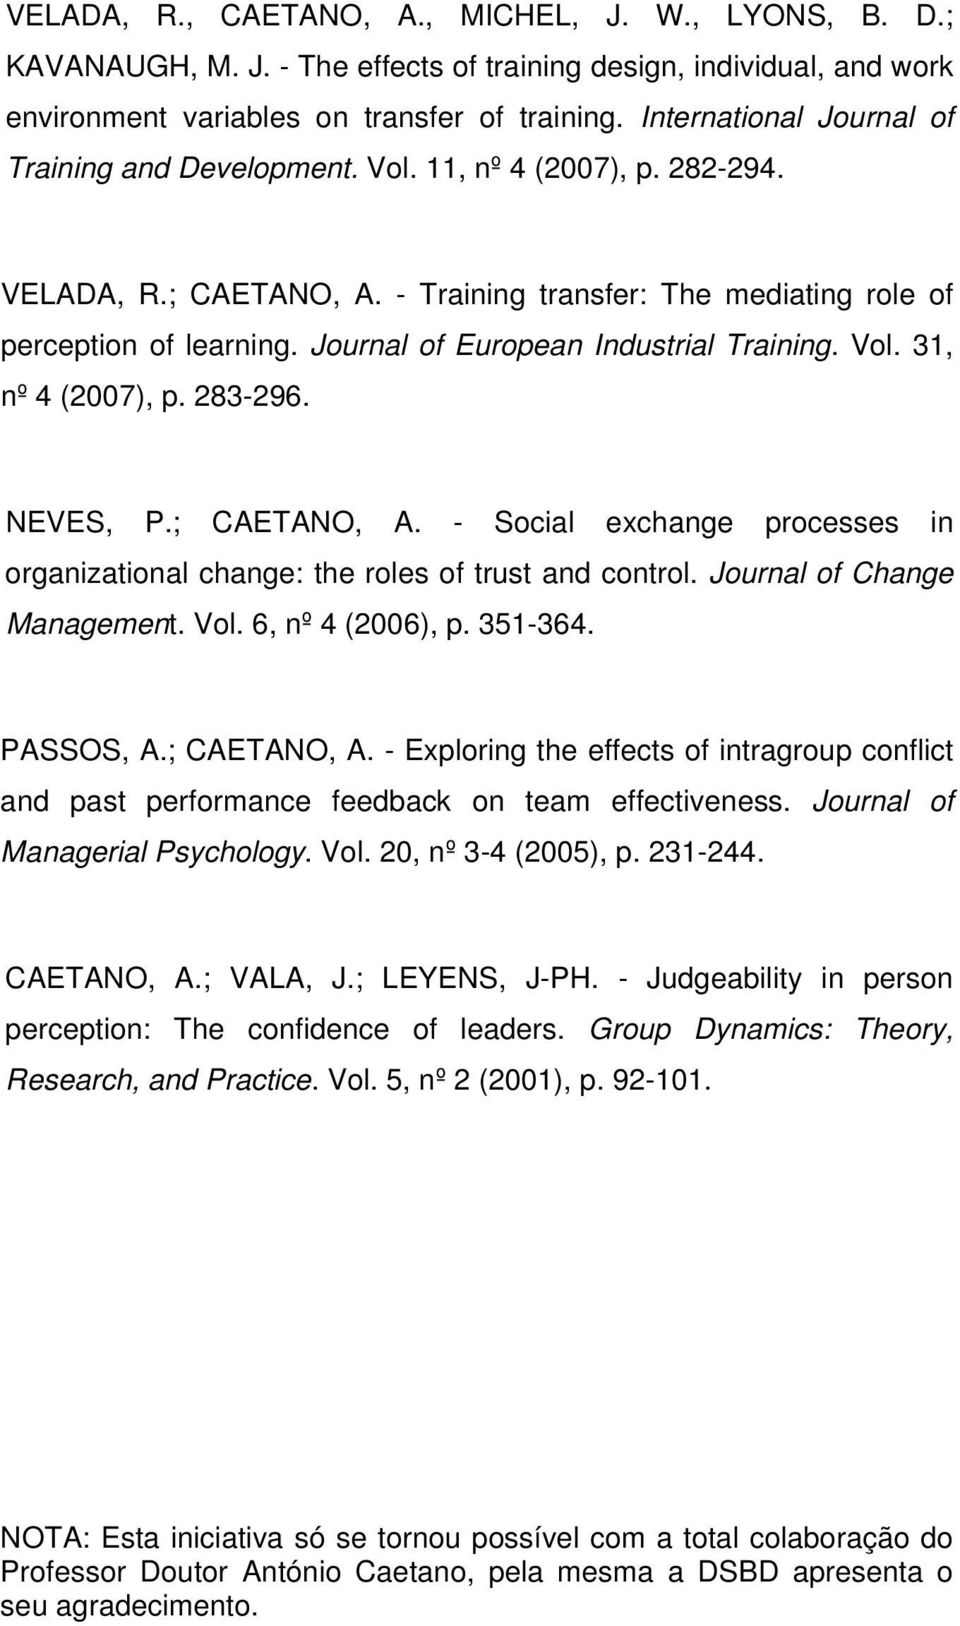 Journal of European Industrial Training. Vol. 31, nº 4 (2007), p. 283-296. NEVES, P.; CAETANO, A. - Social exchange processes in organizational change: the roles of trust and control.